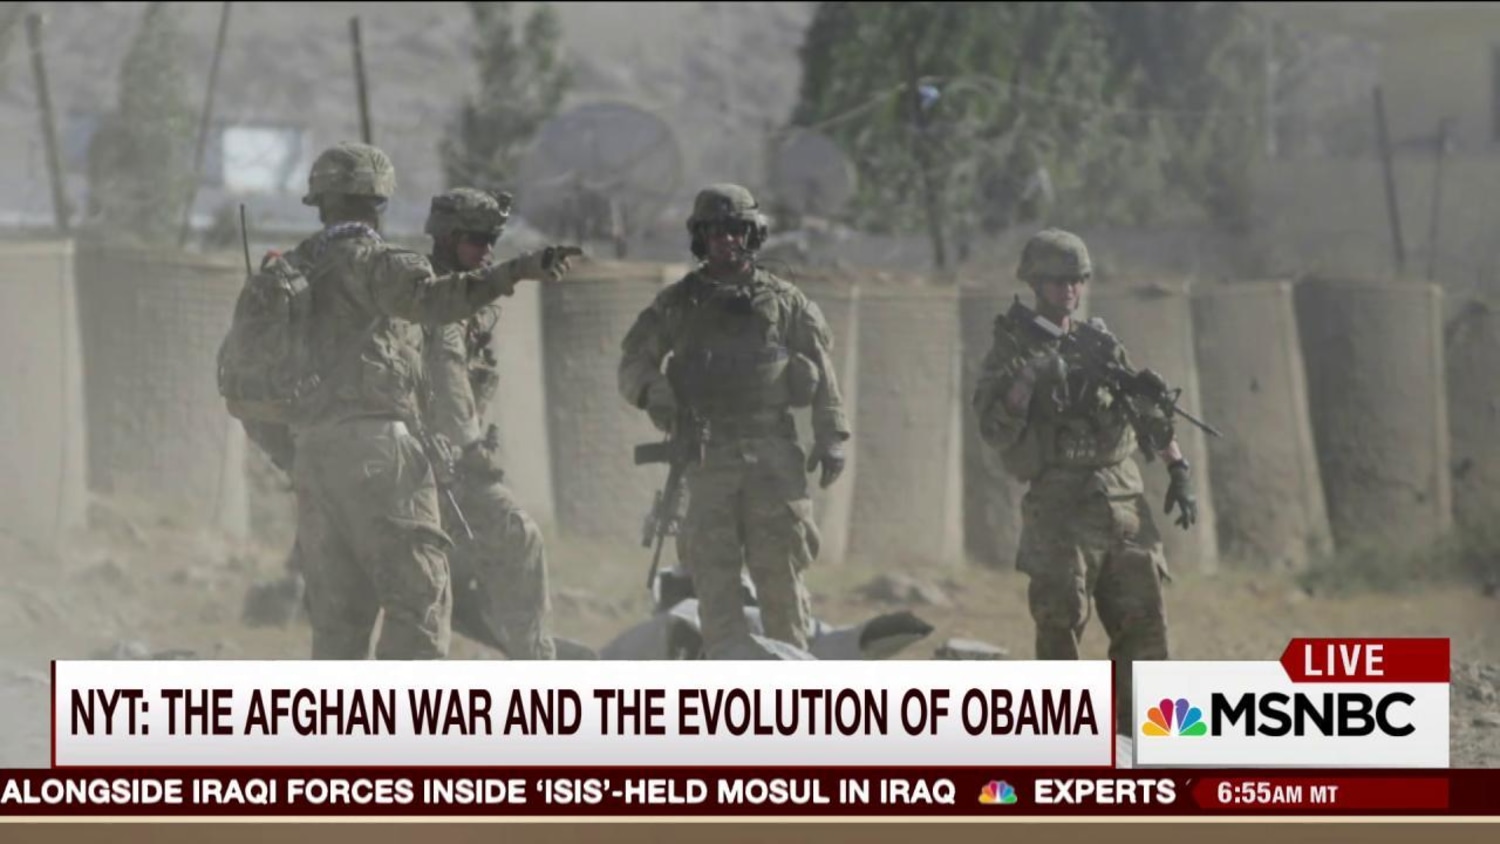 The Afghan war and the evolution of Obama